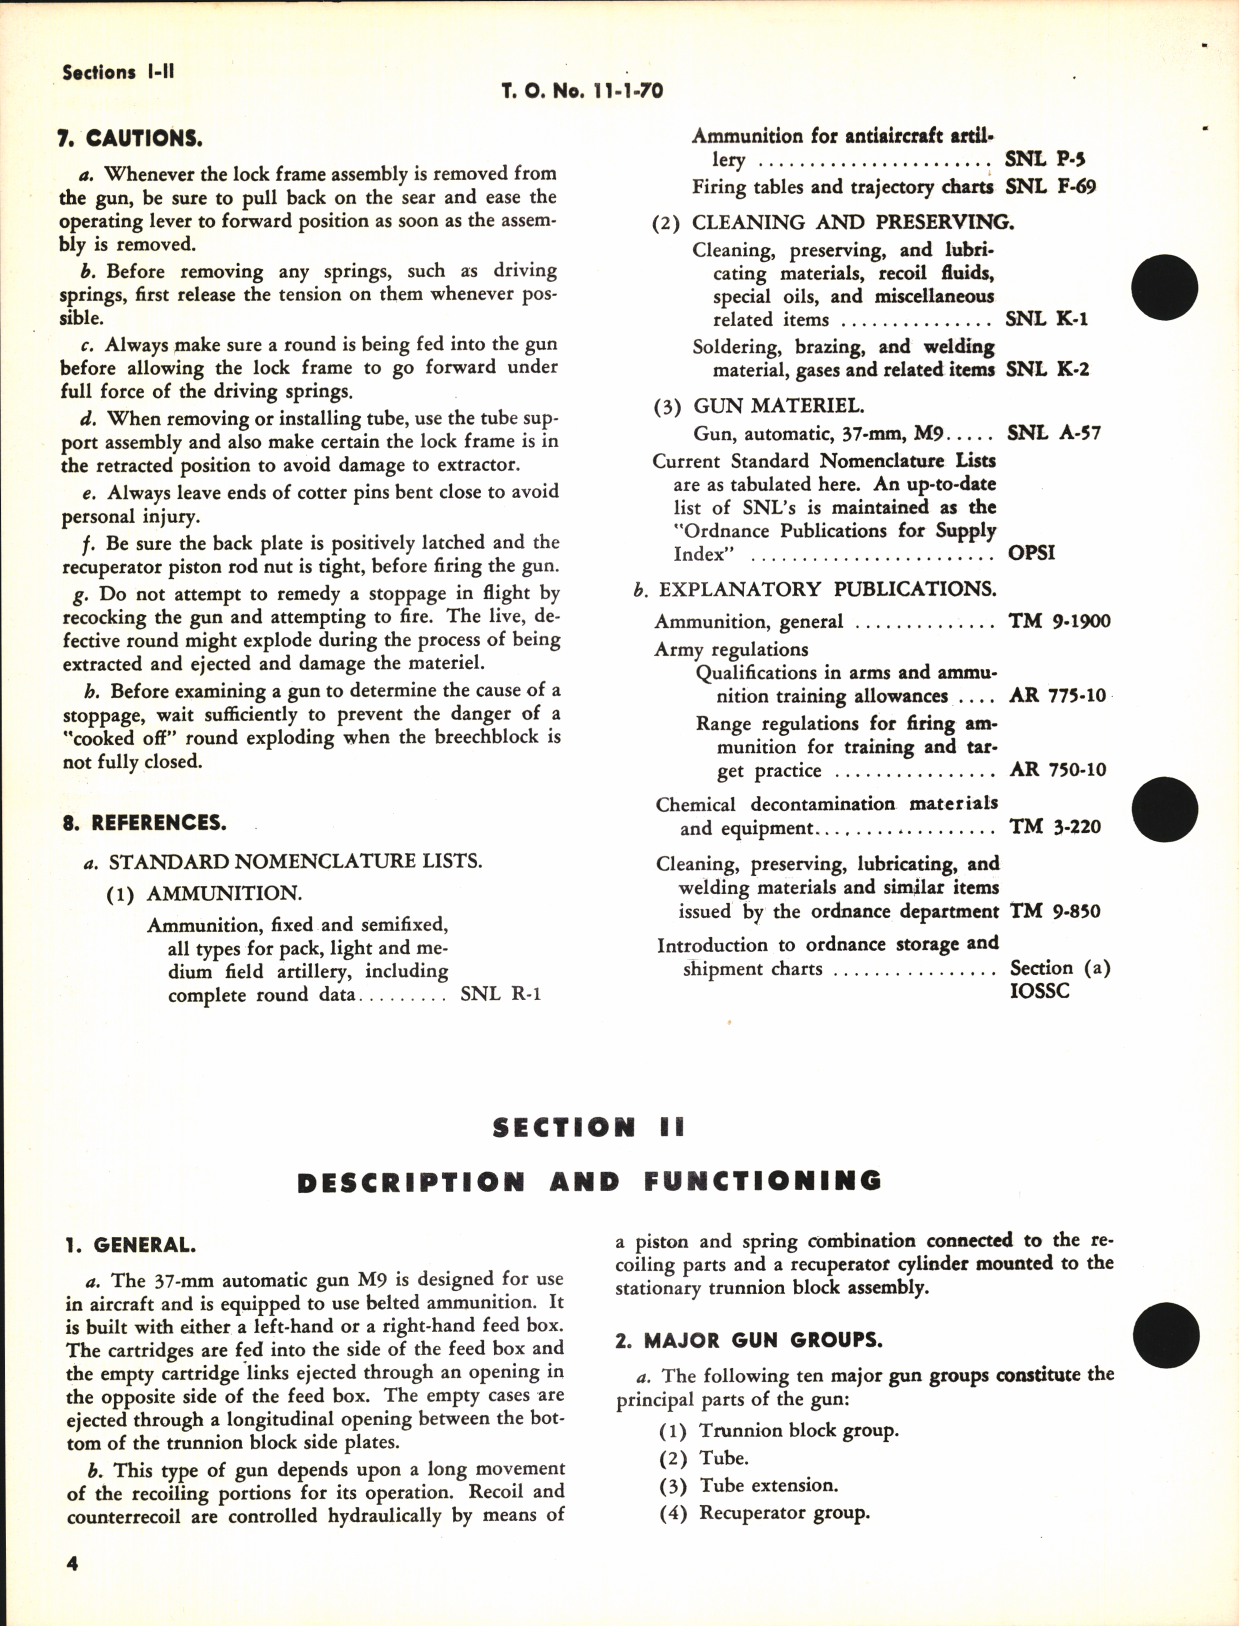 Sample page 8 from AirCorps Library document: Handbook of Instructions with Parts Catalog for 37 MM Automatic Aircraft Gun M9